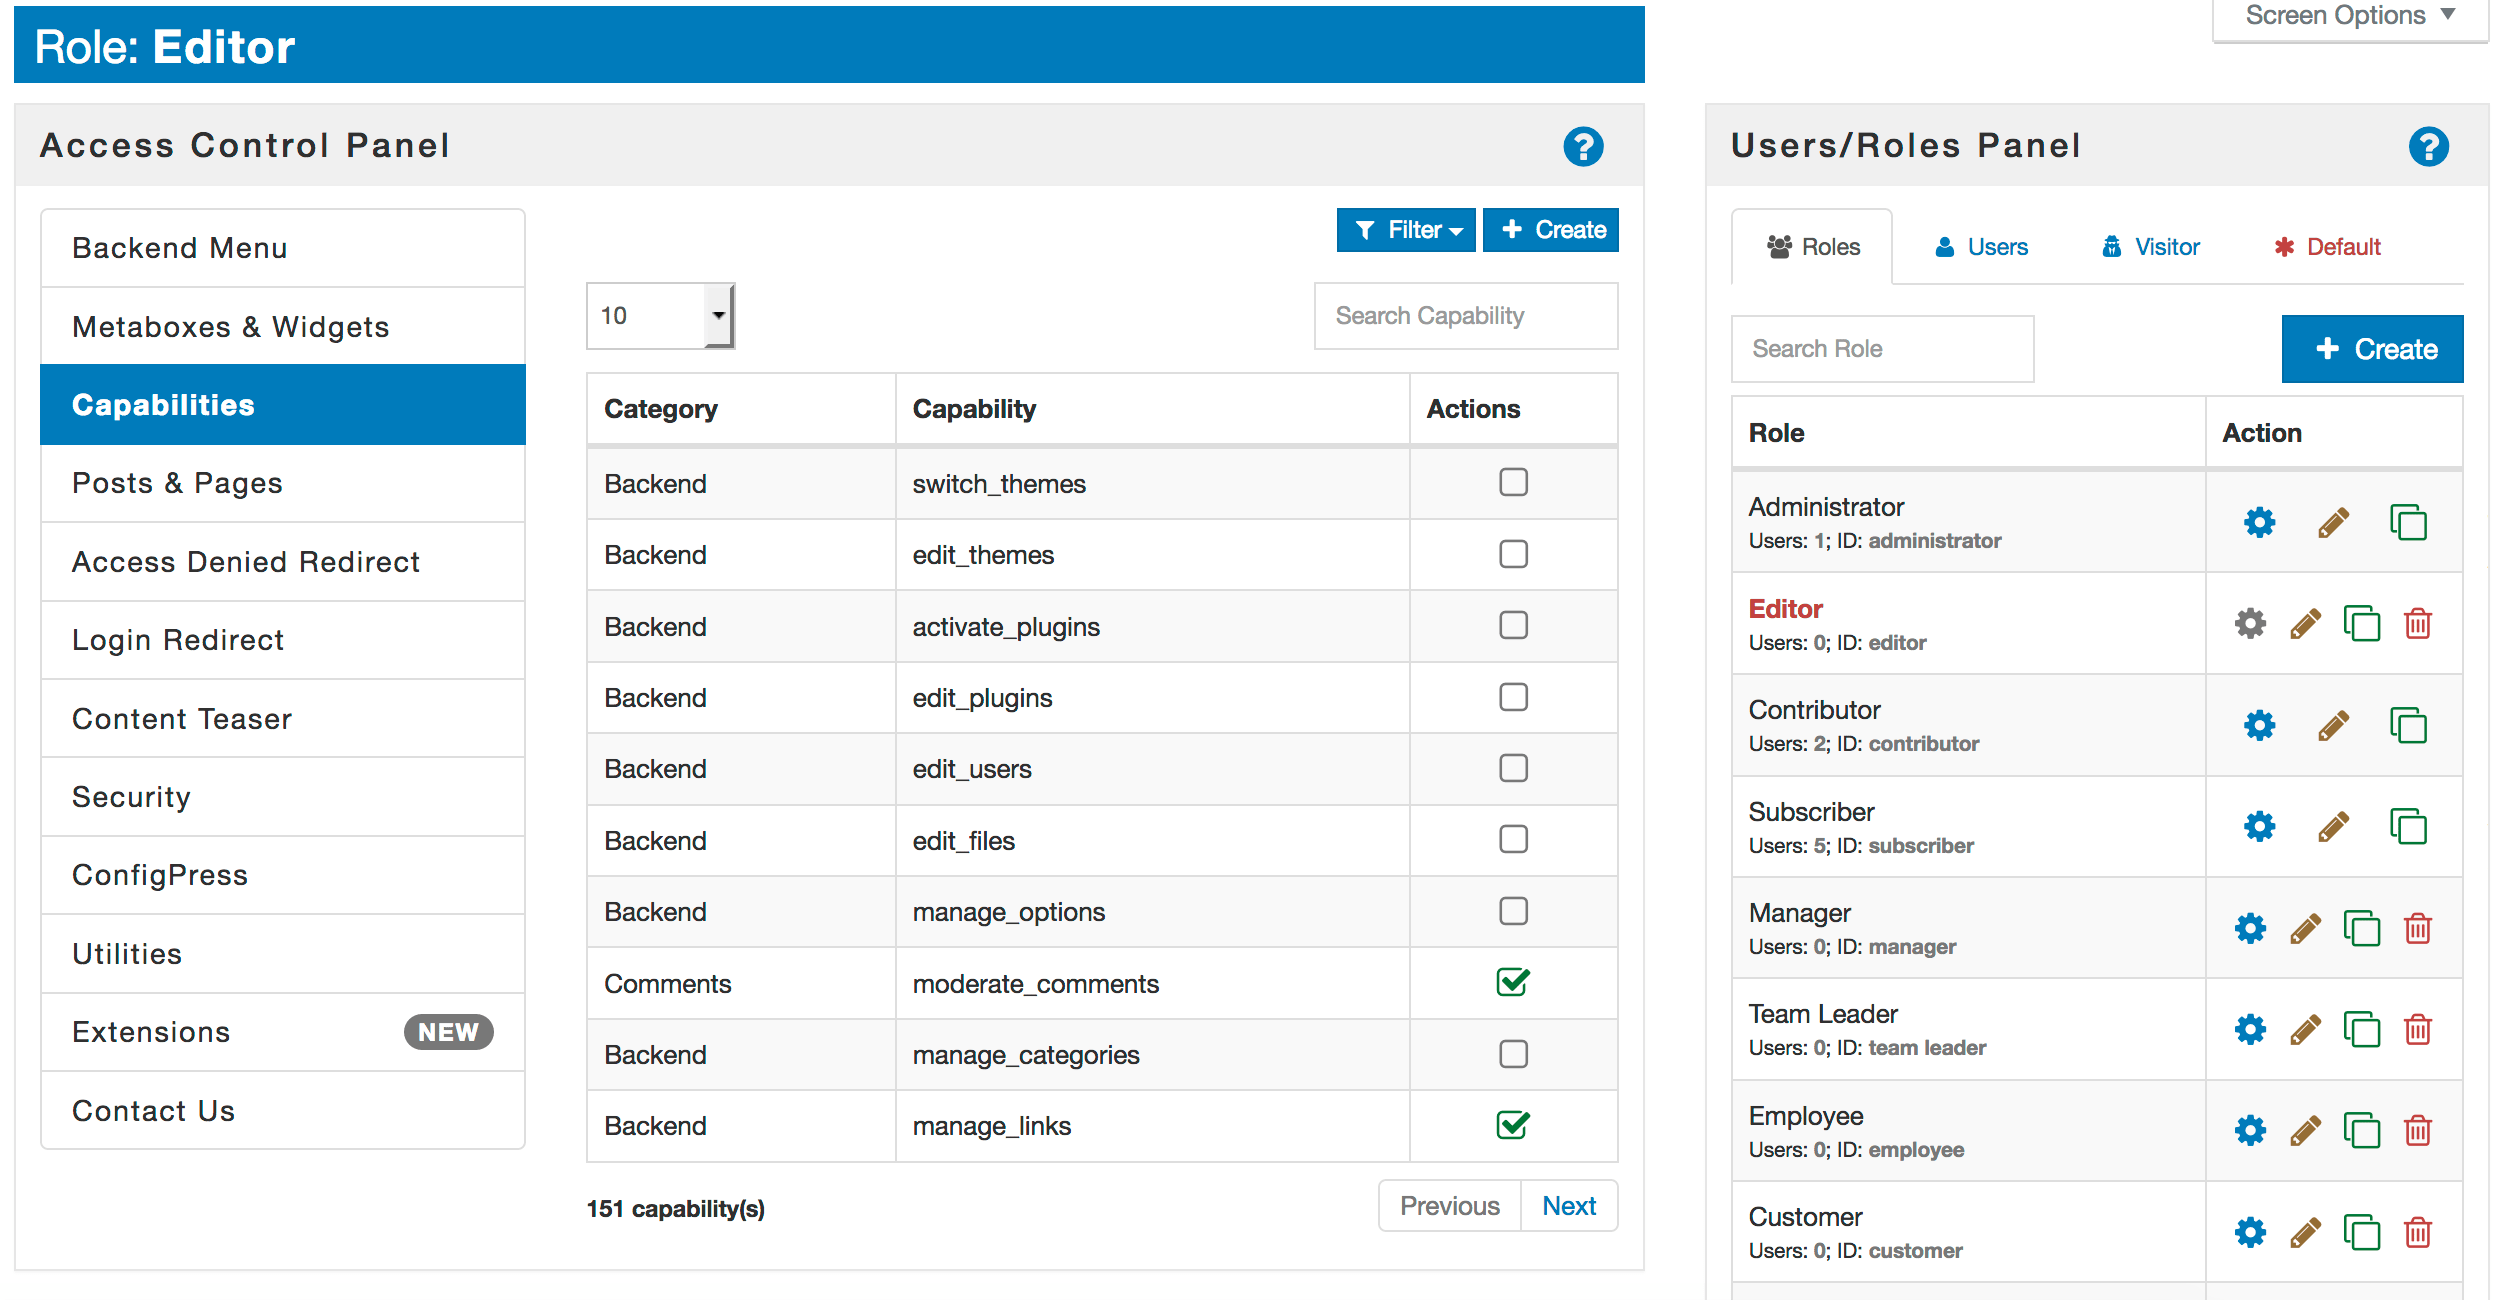 Posts and pages access options form